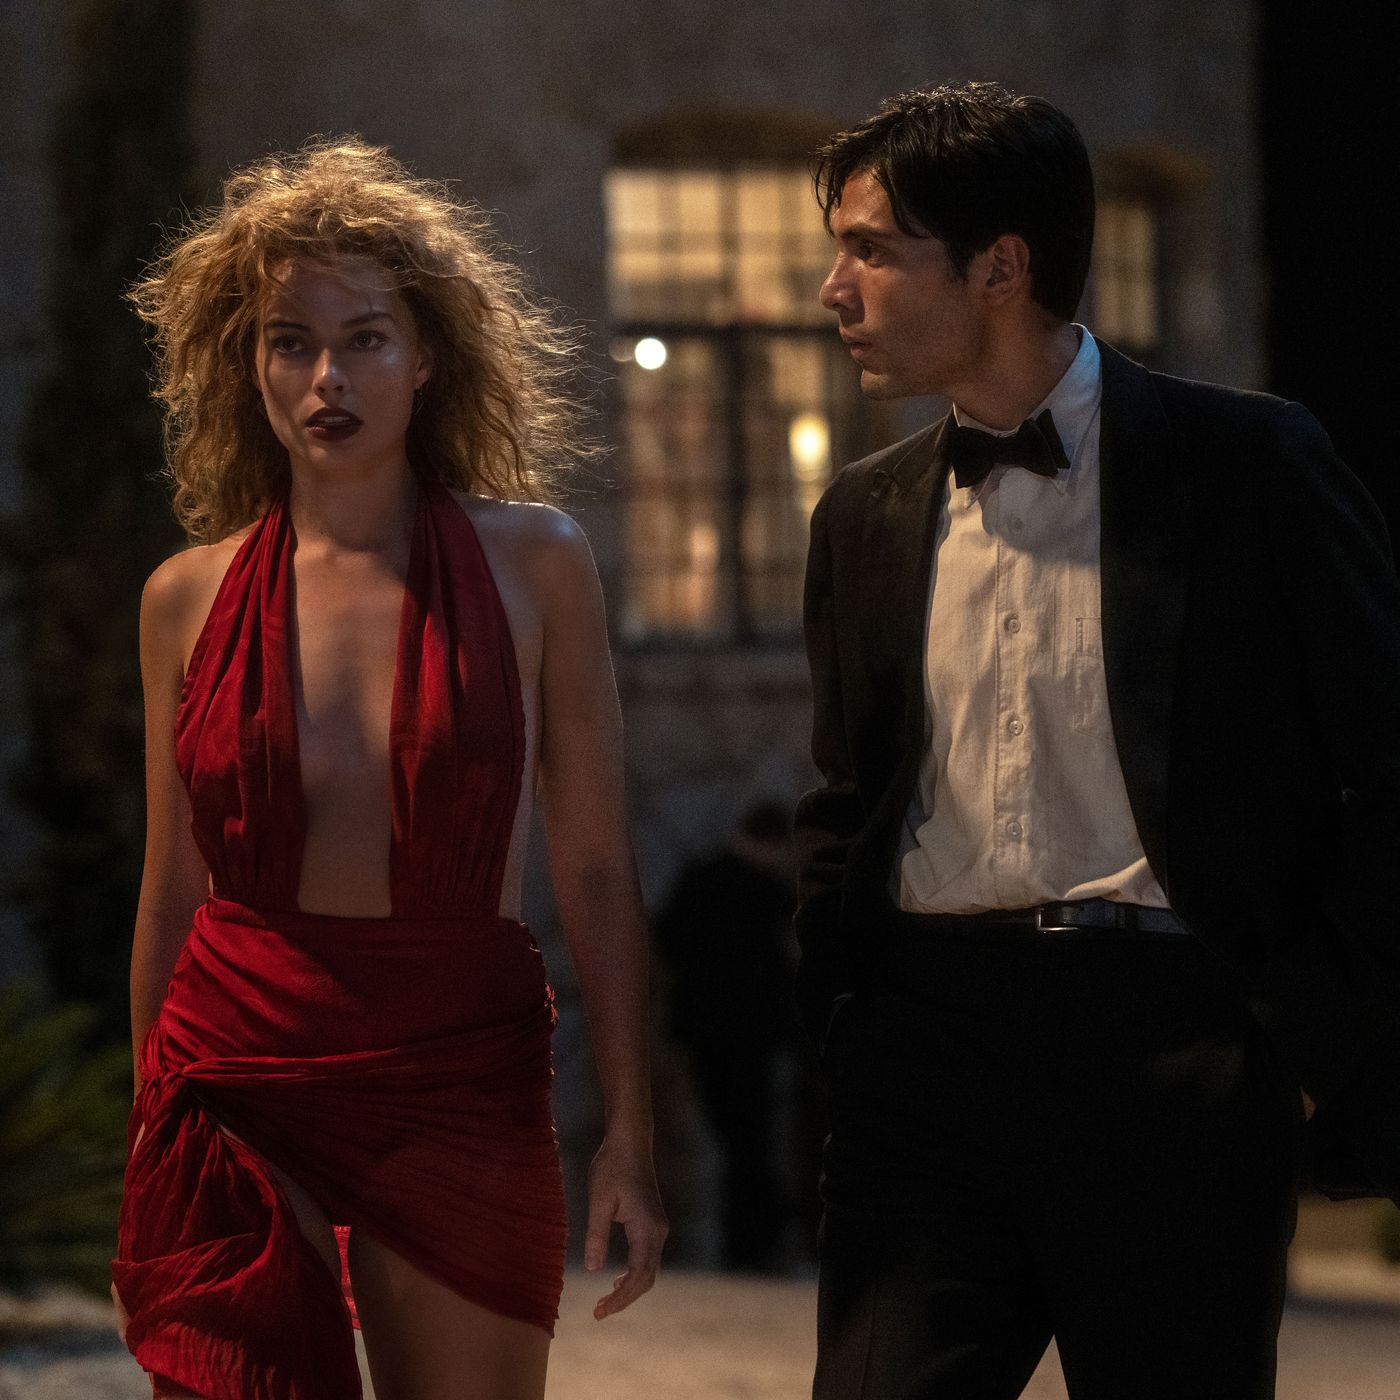 Babylon Movie Review Damien Chazelle, Wheres the Thrill?